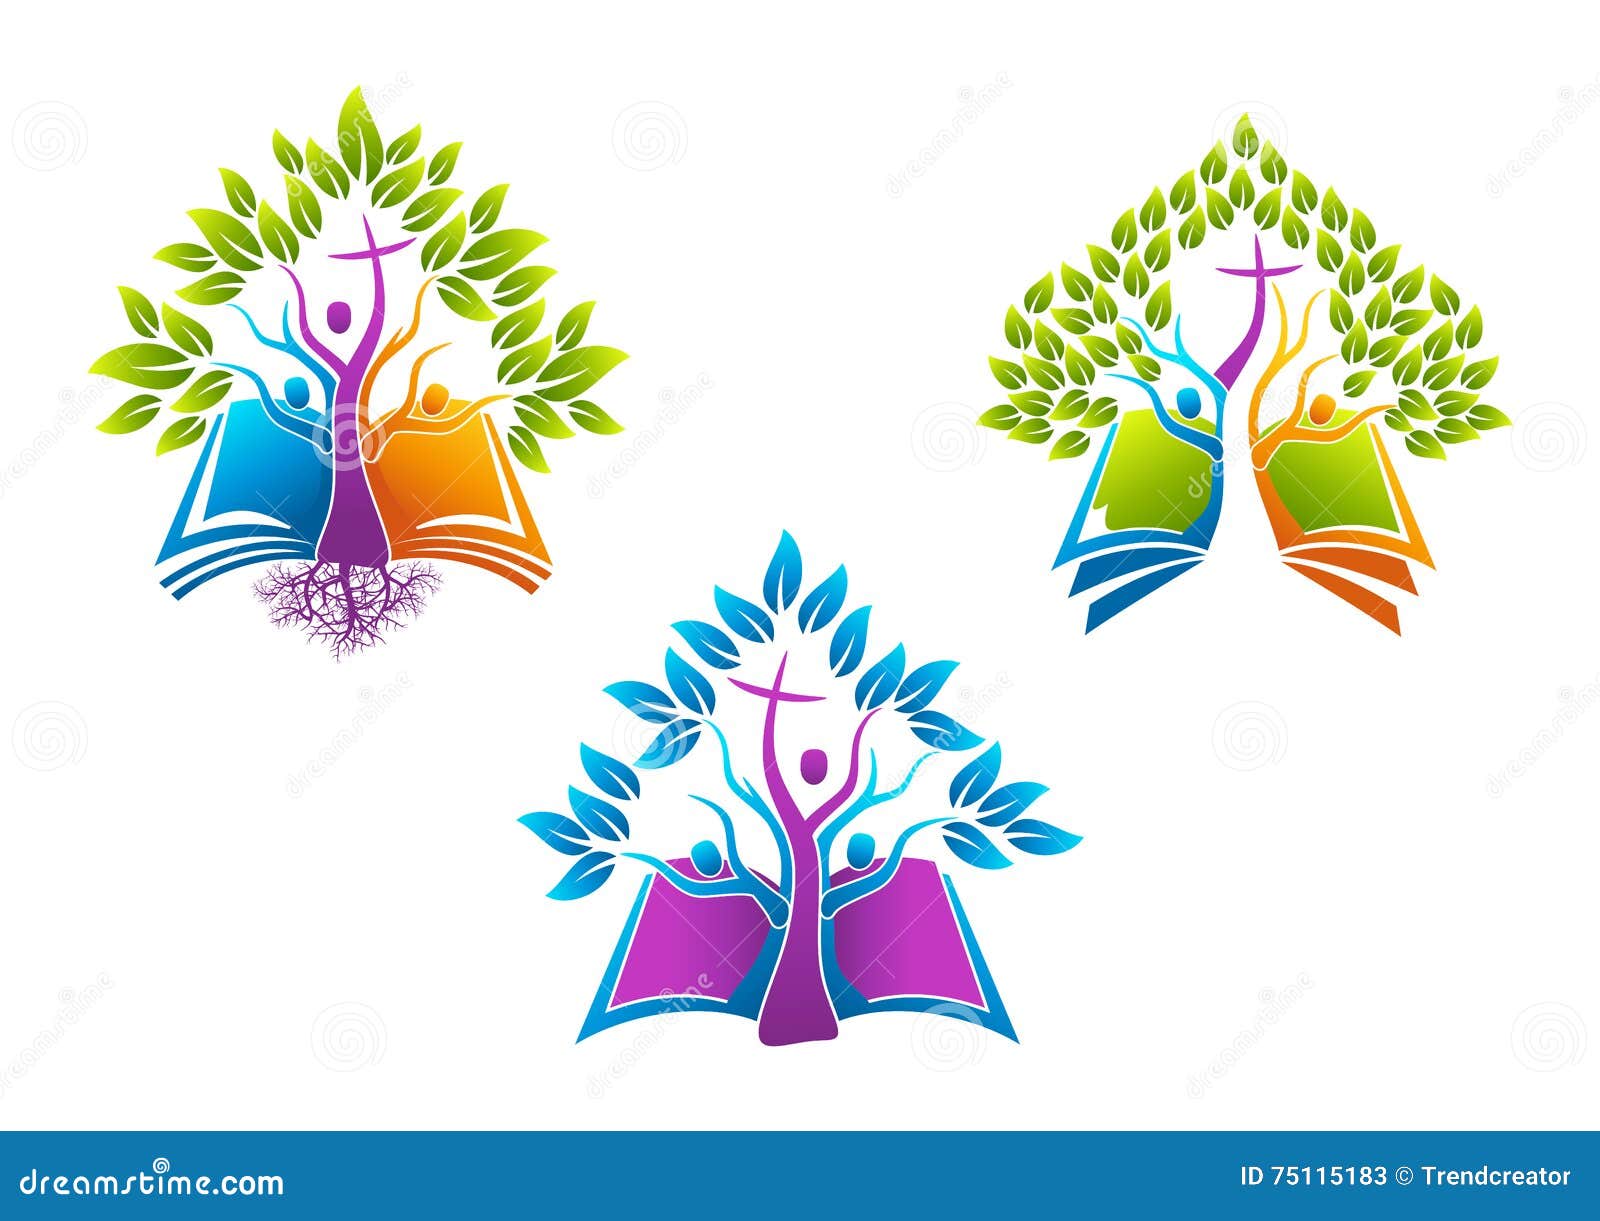 bible christian tree logo, book root icon holy spirit family , people church   